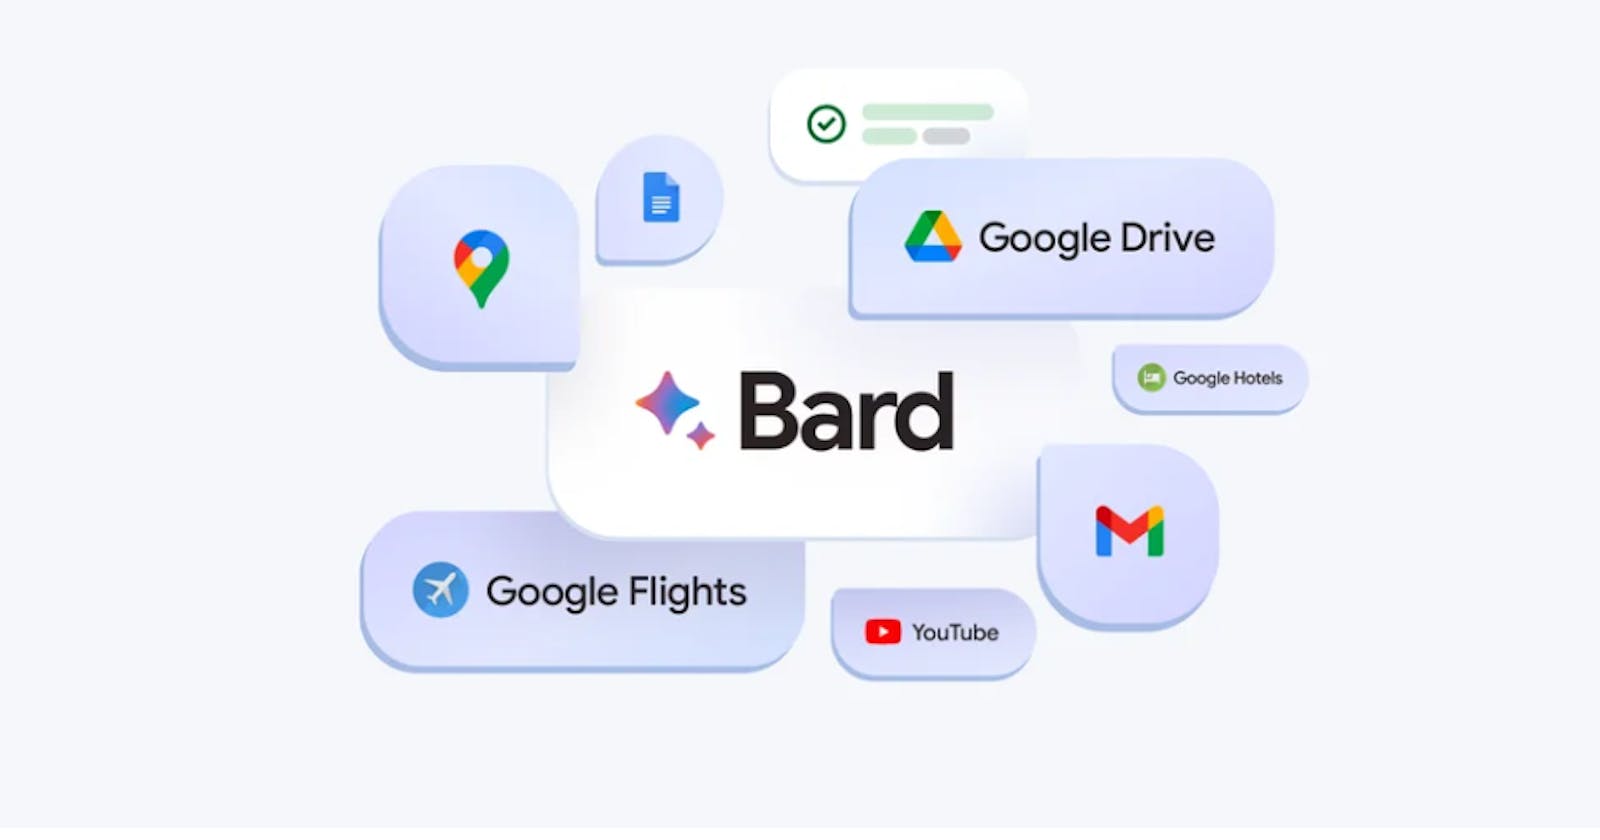 Bard's Big Update: Google Integrates AI with Google Apps